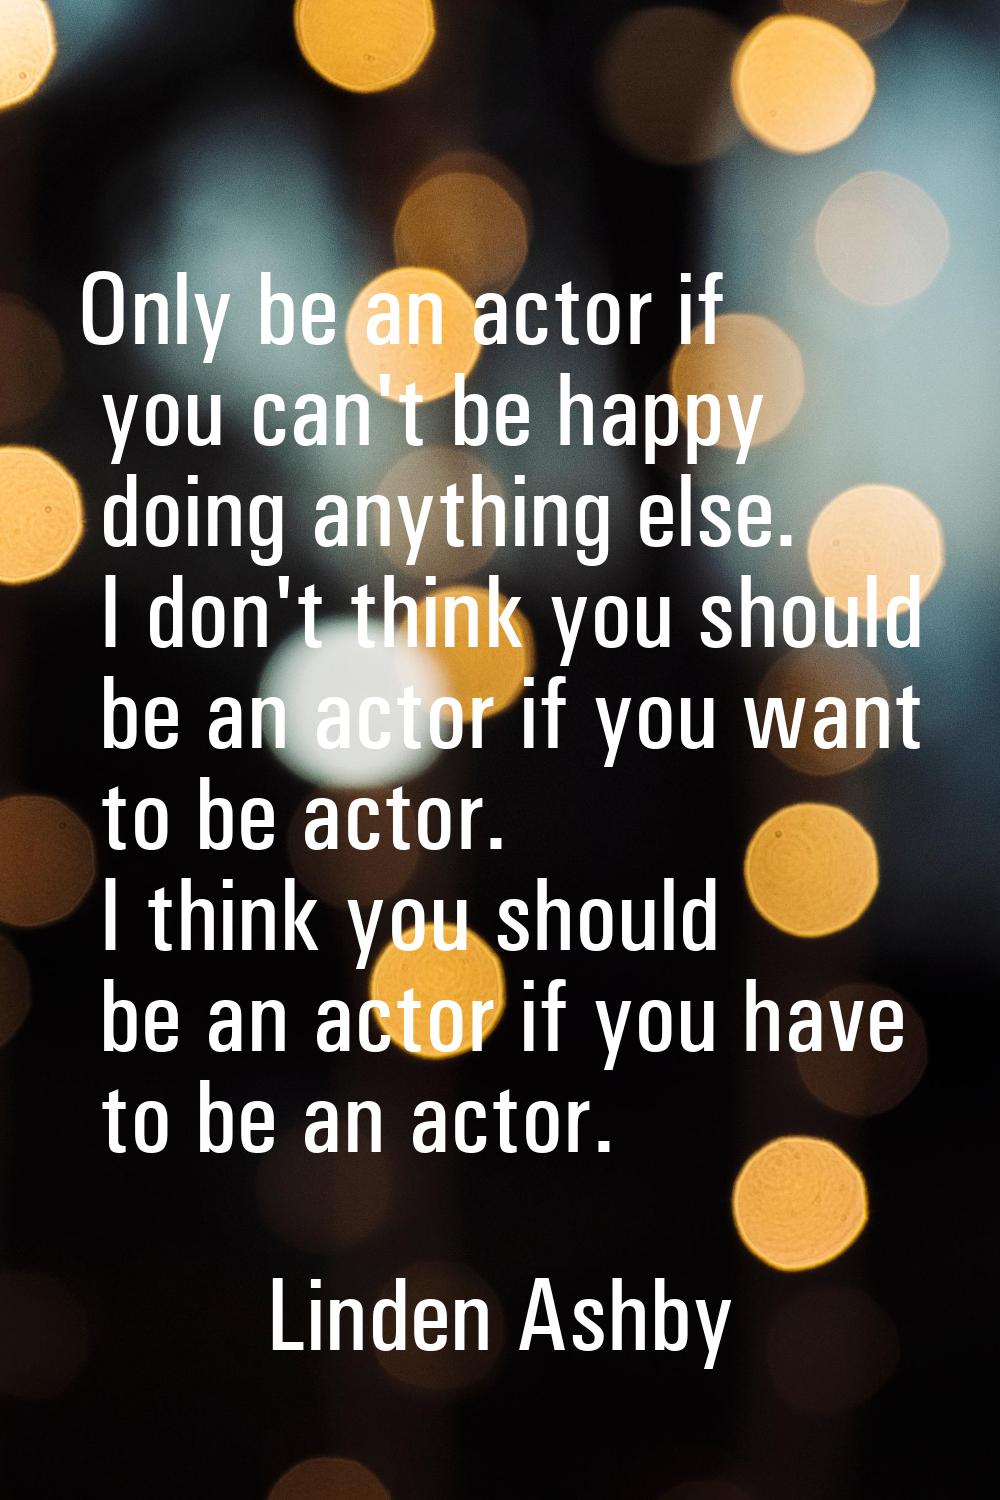 Only be an actor if you can't be happy doing anything else. I don't think you should be an actor if